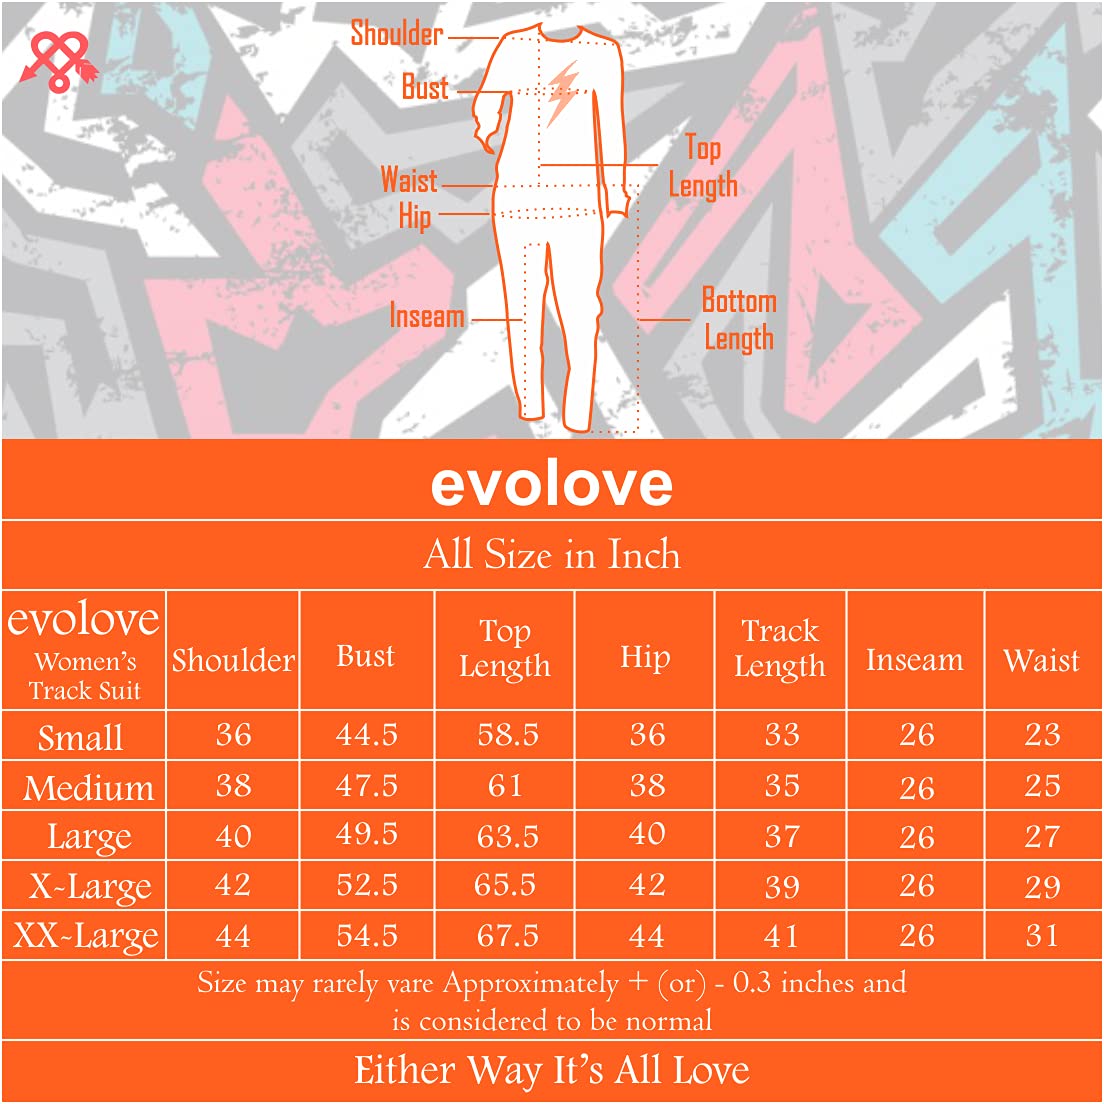 Evolove Women's Track Suit or Tracksuit Top & Leggings Pants Outfit Set Yoga Track Suit Pants, Joggers, Gym, Active Lower Wear ( S to 2XL Size )